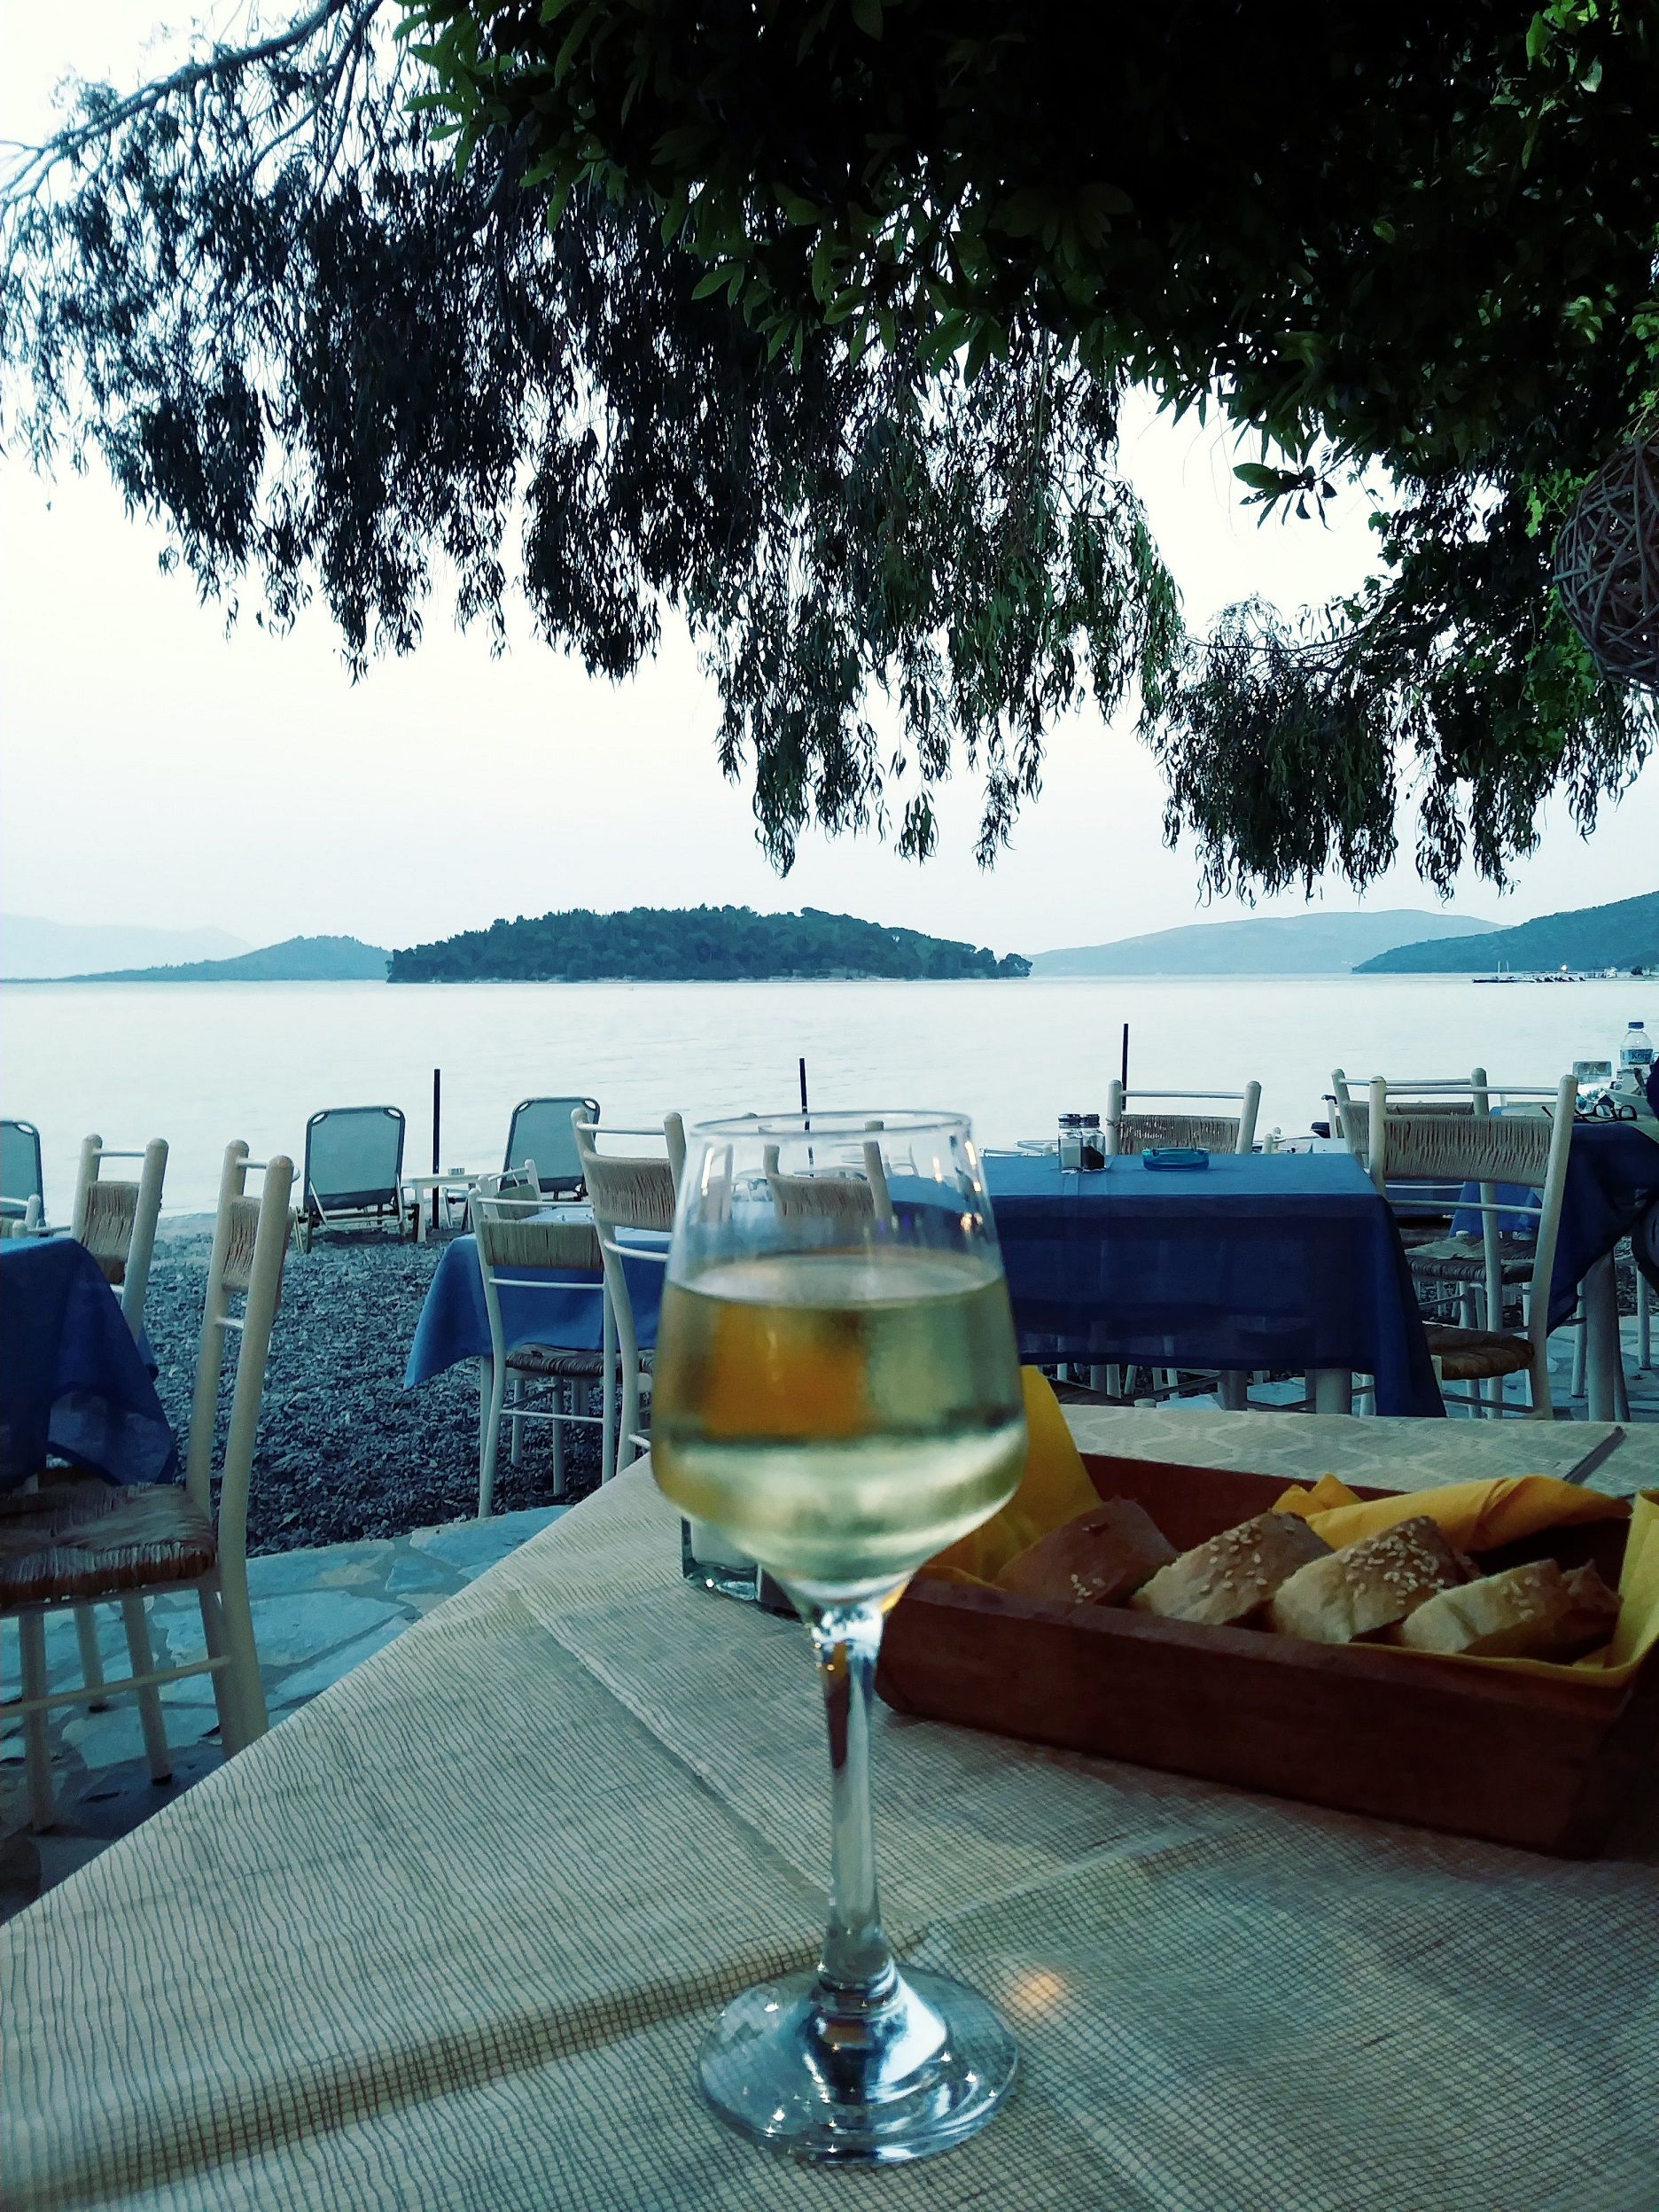 A glass of chilled white wine and some bread on a restaurant table in Greece.